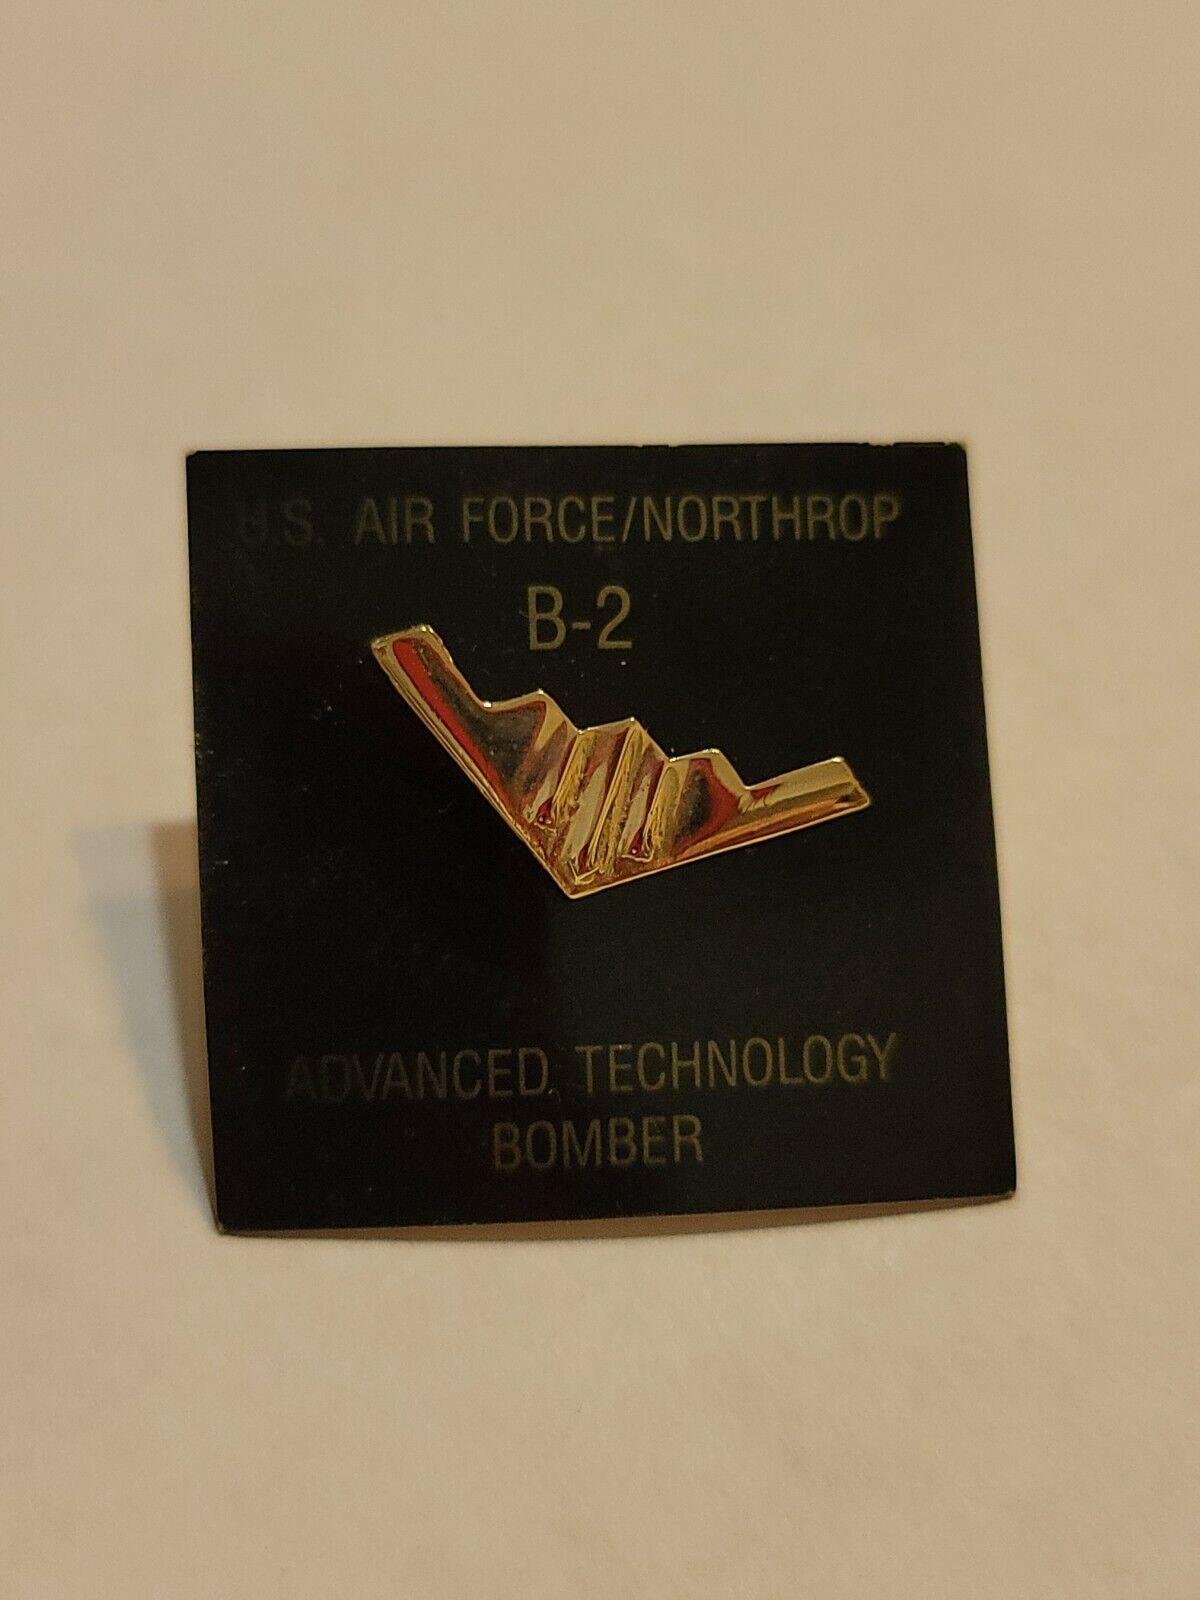 B-2 STEALTH BOMBER PIN/TIE TACK/LAPEL/HAT PIN EXCELLENT COND.